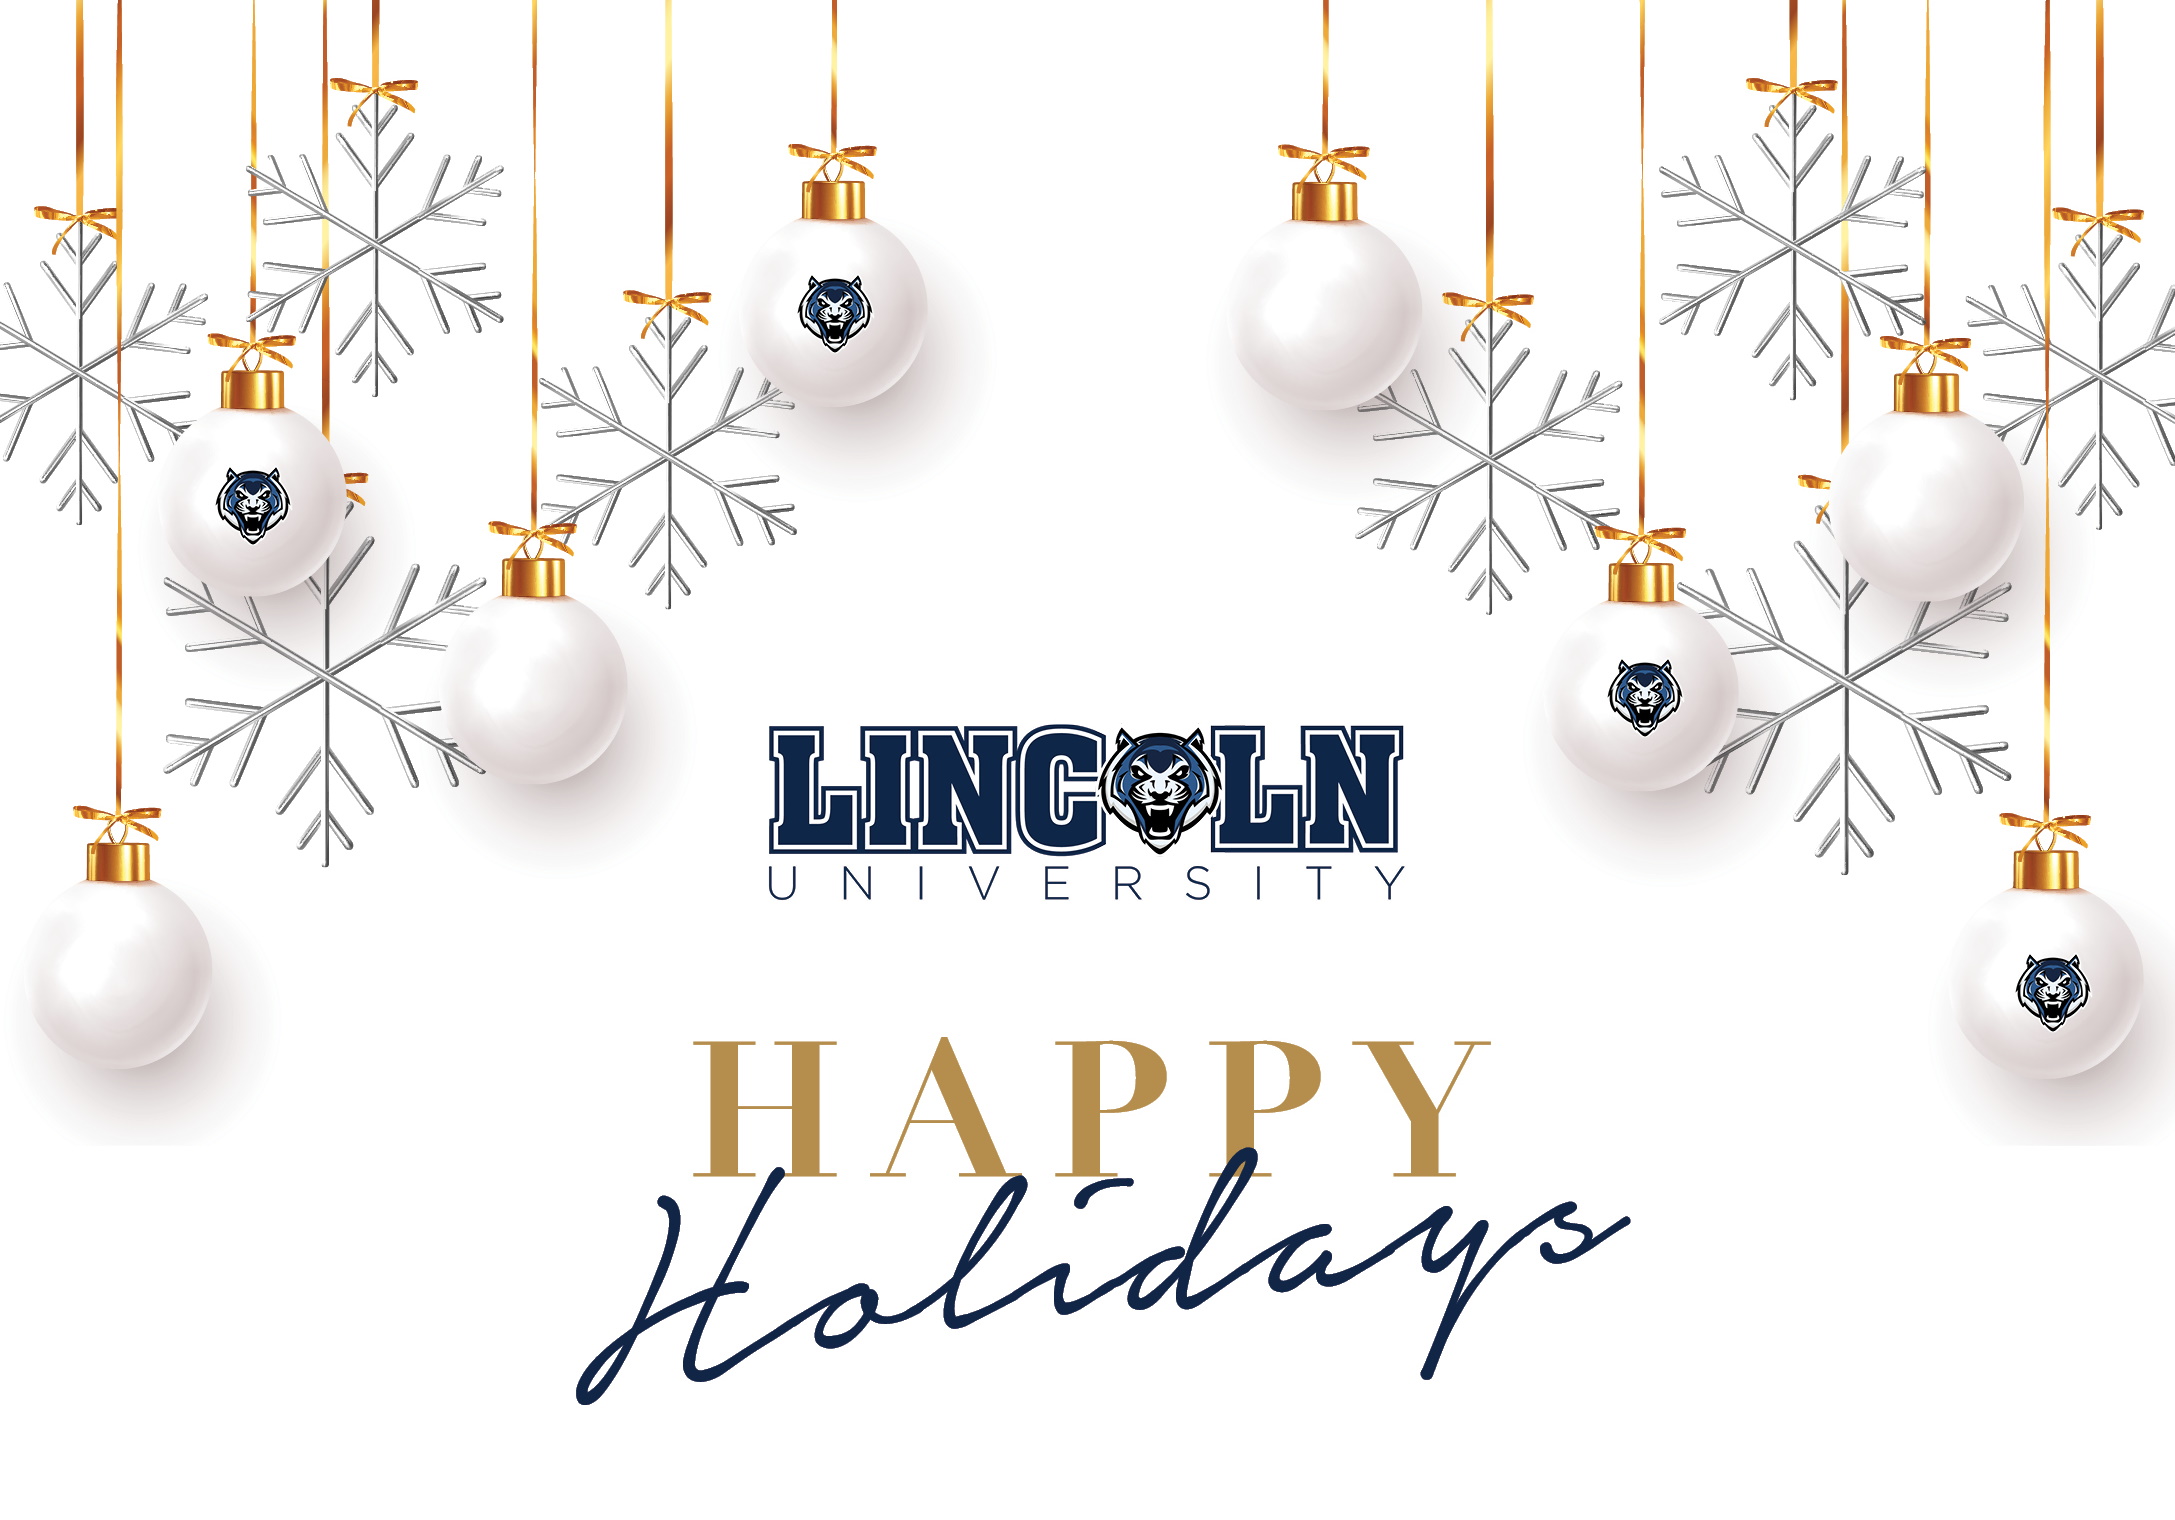 A holiday message from Lincoln University of Missouri